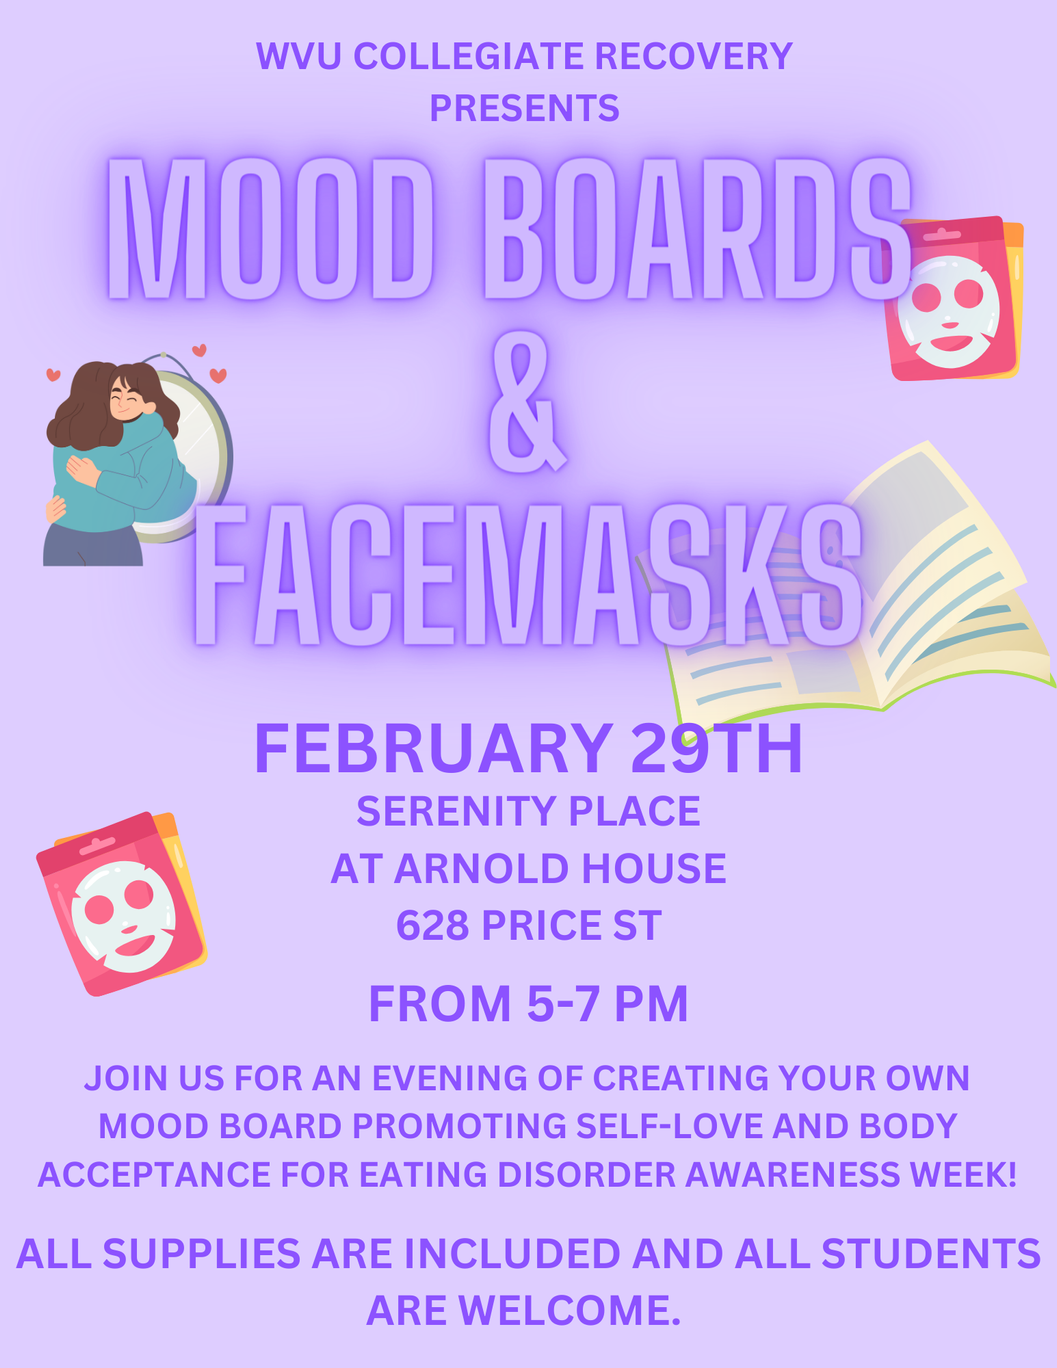 WVU Collegiate Recovery presents Mood Boards and Facemasks on 2/29 from 5 to 7pm at 628 Price Street. Supplies are included and all students are welcome!